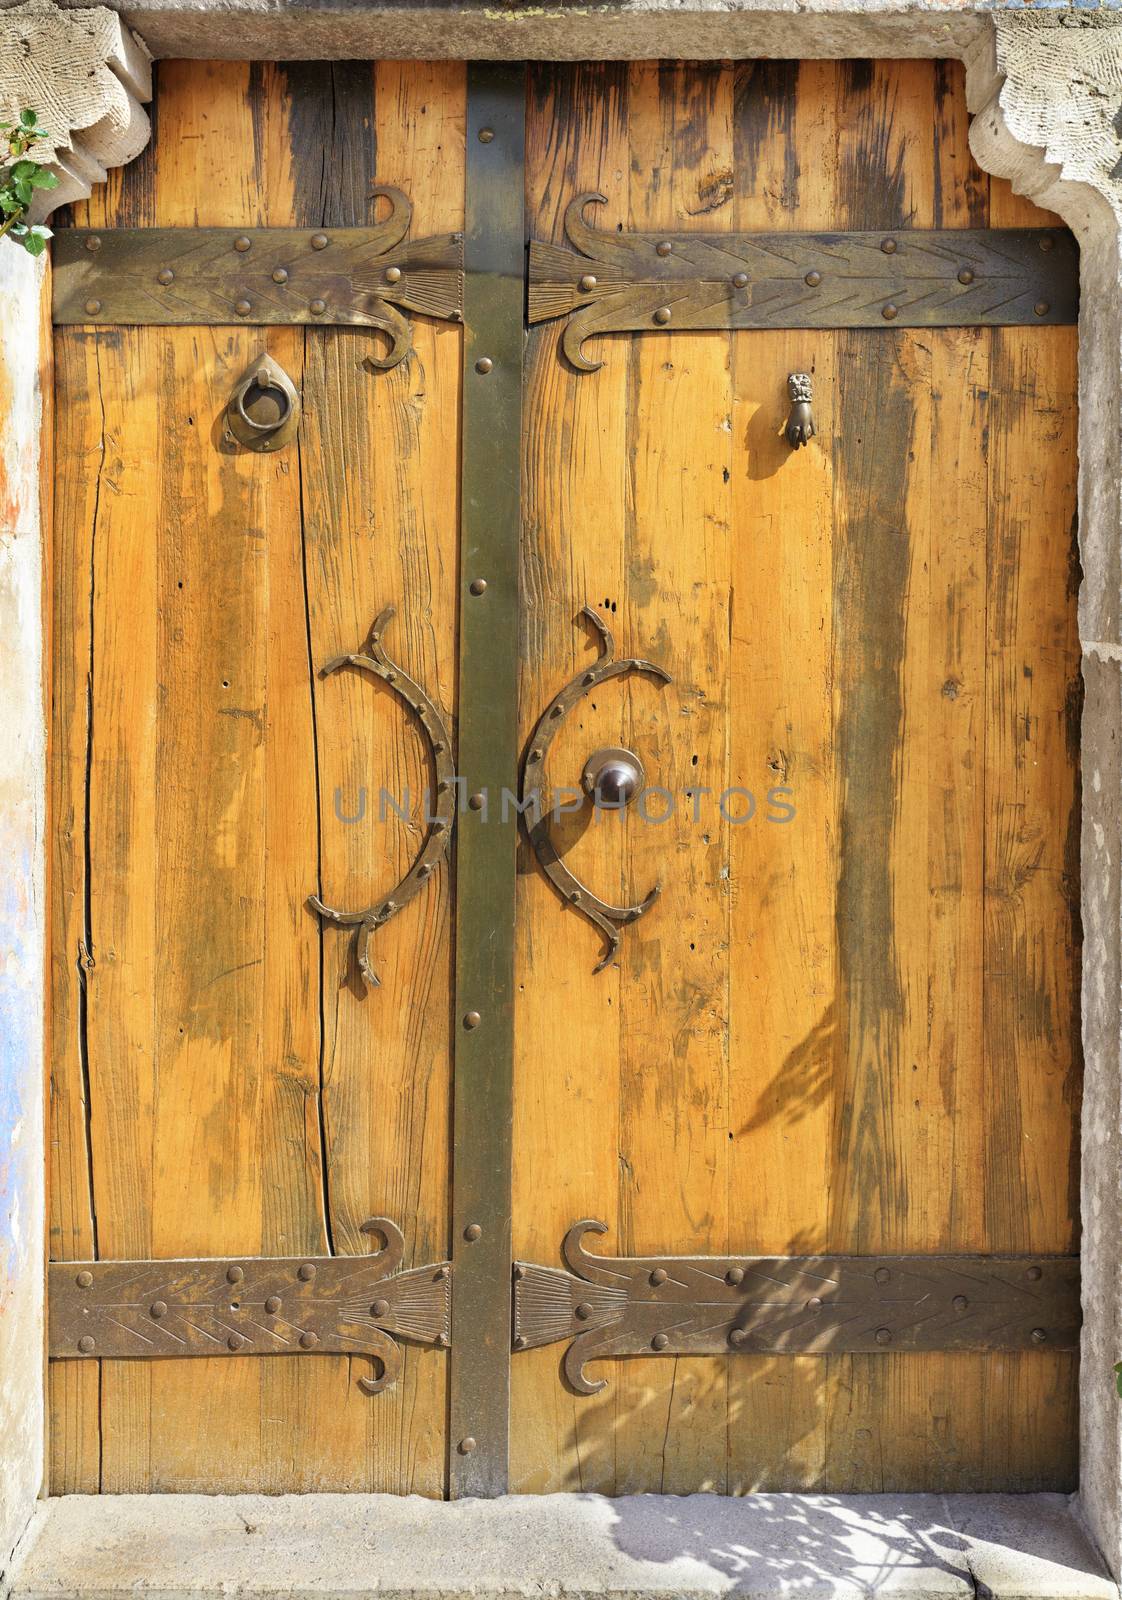 Antique antique wooden doors with forged handles, rivets and rungs. by Sergii